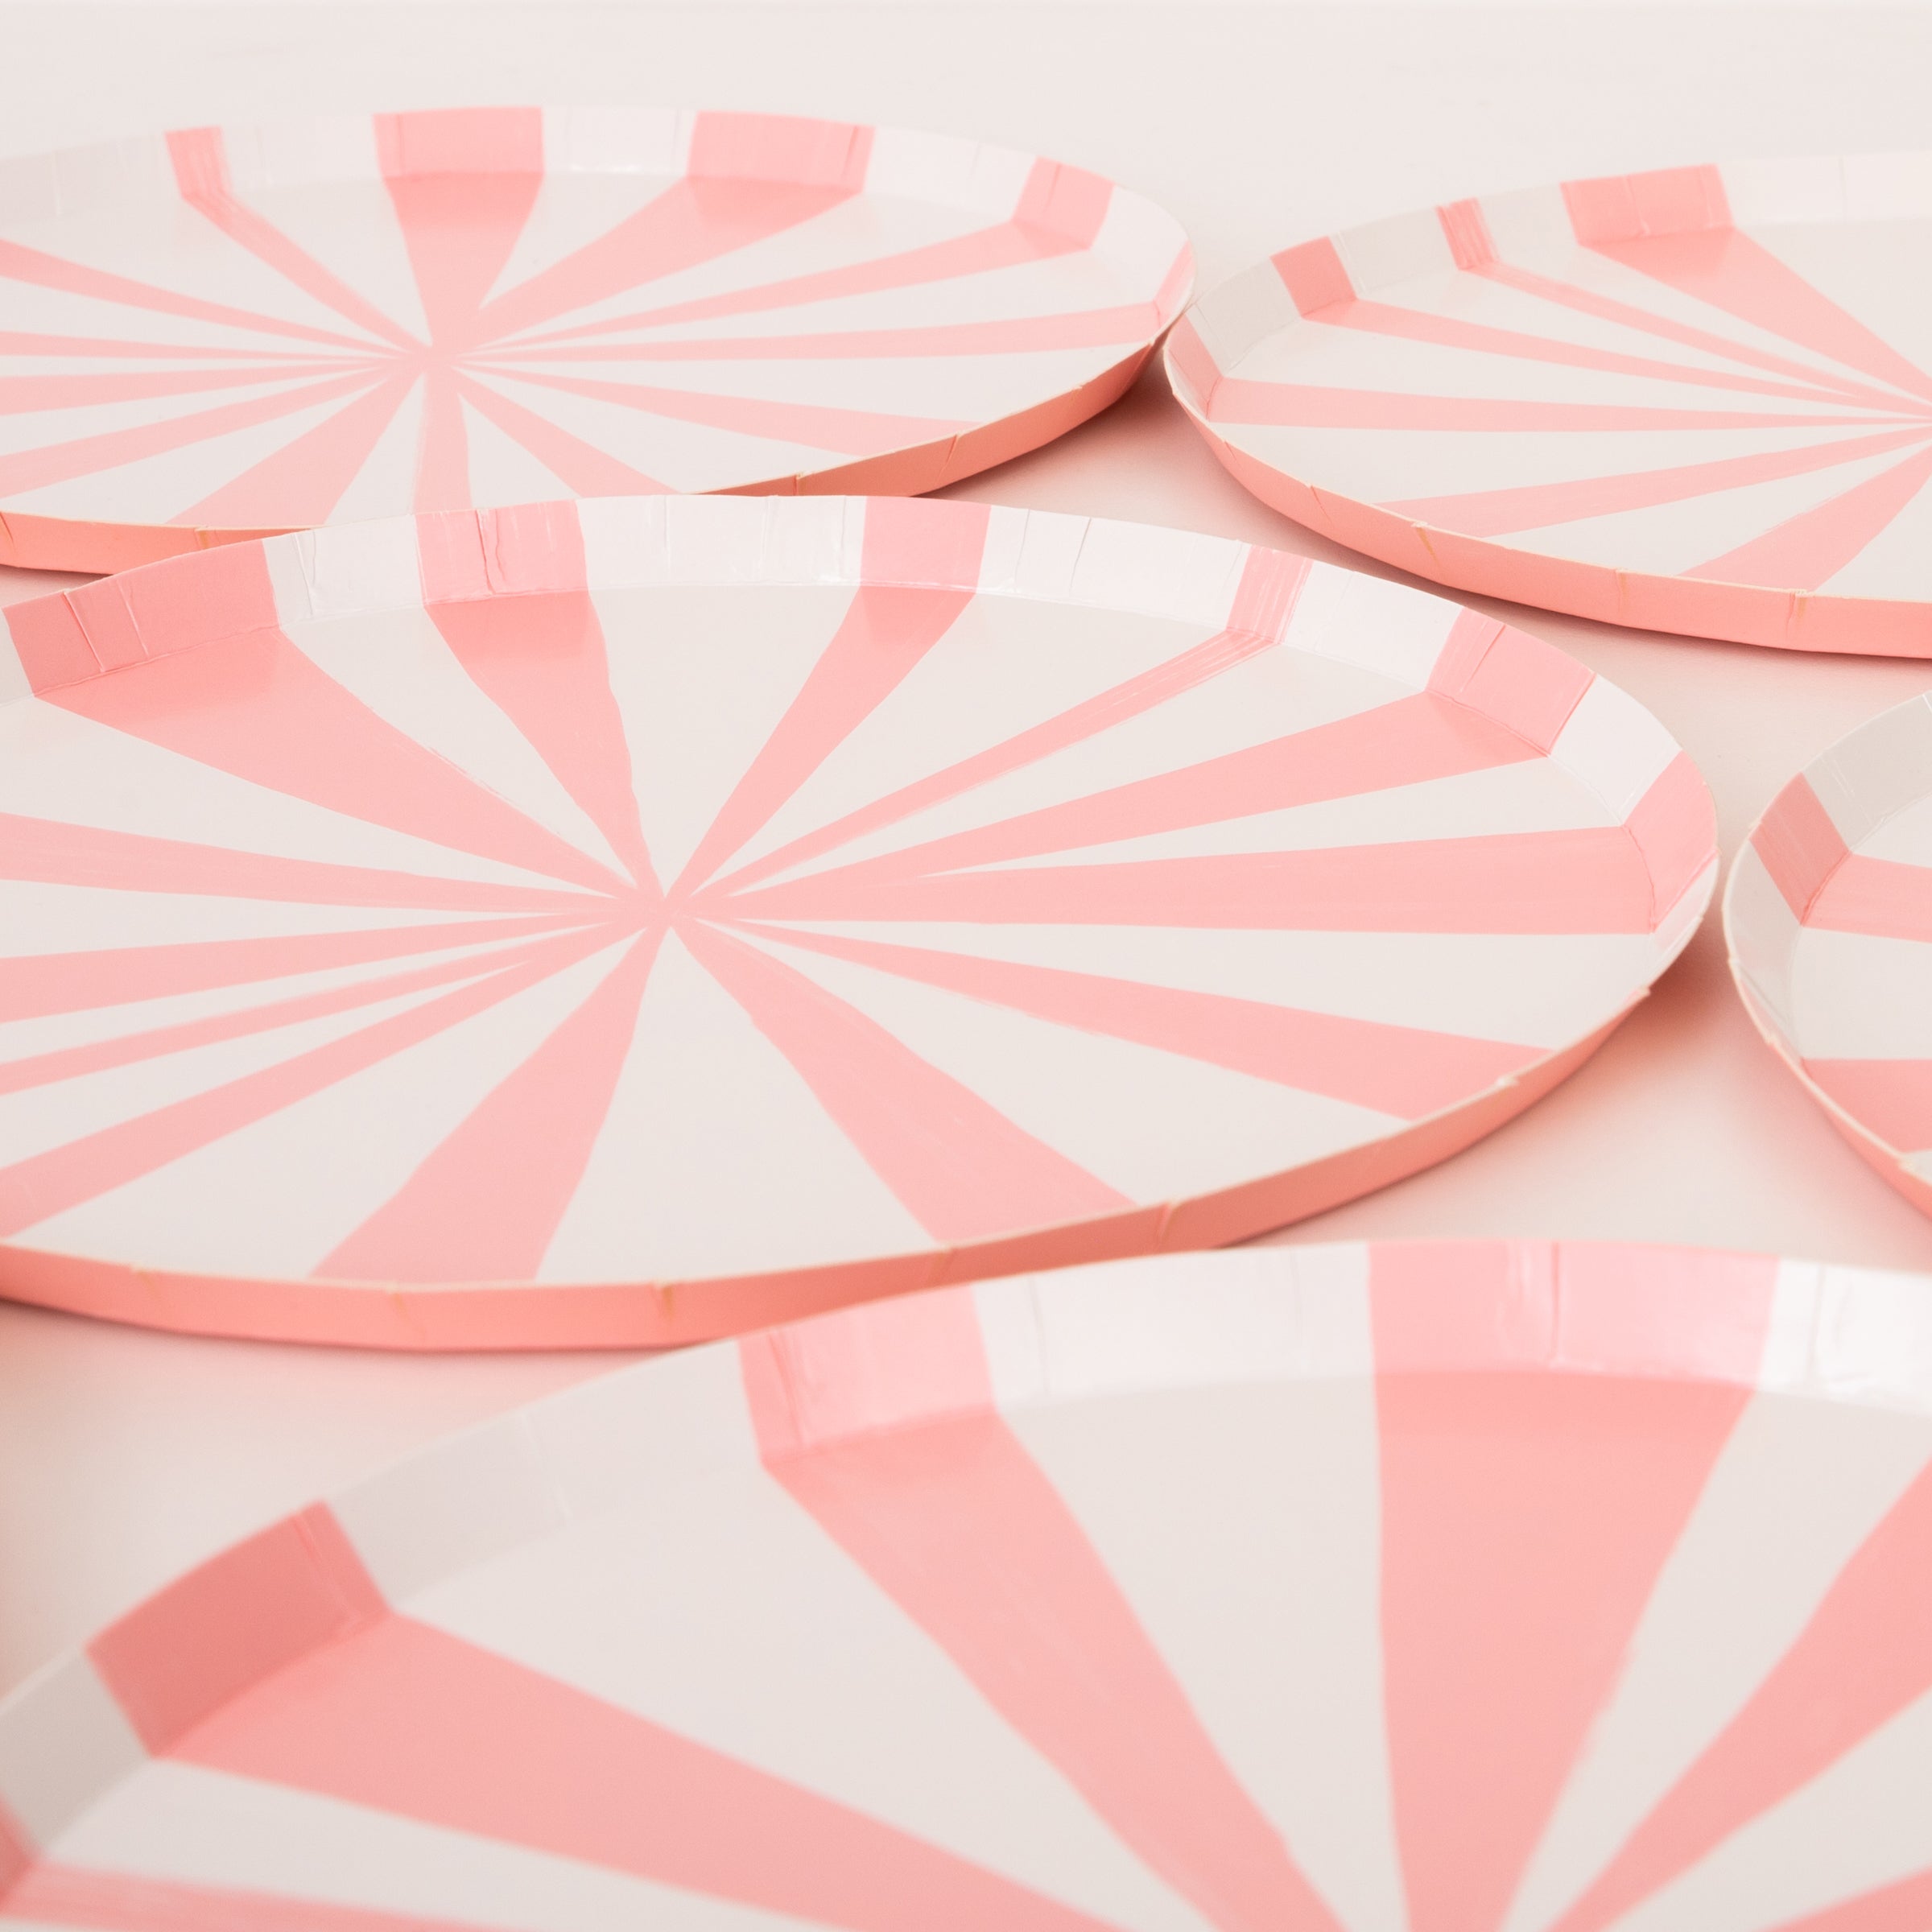 Our small plates, with a pretty pink pink stripe, are ideal as party plates, side plates or cocktail plates.